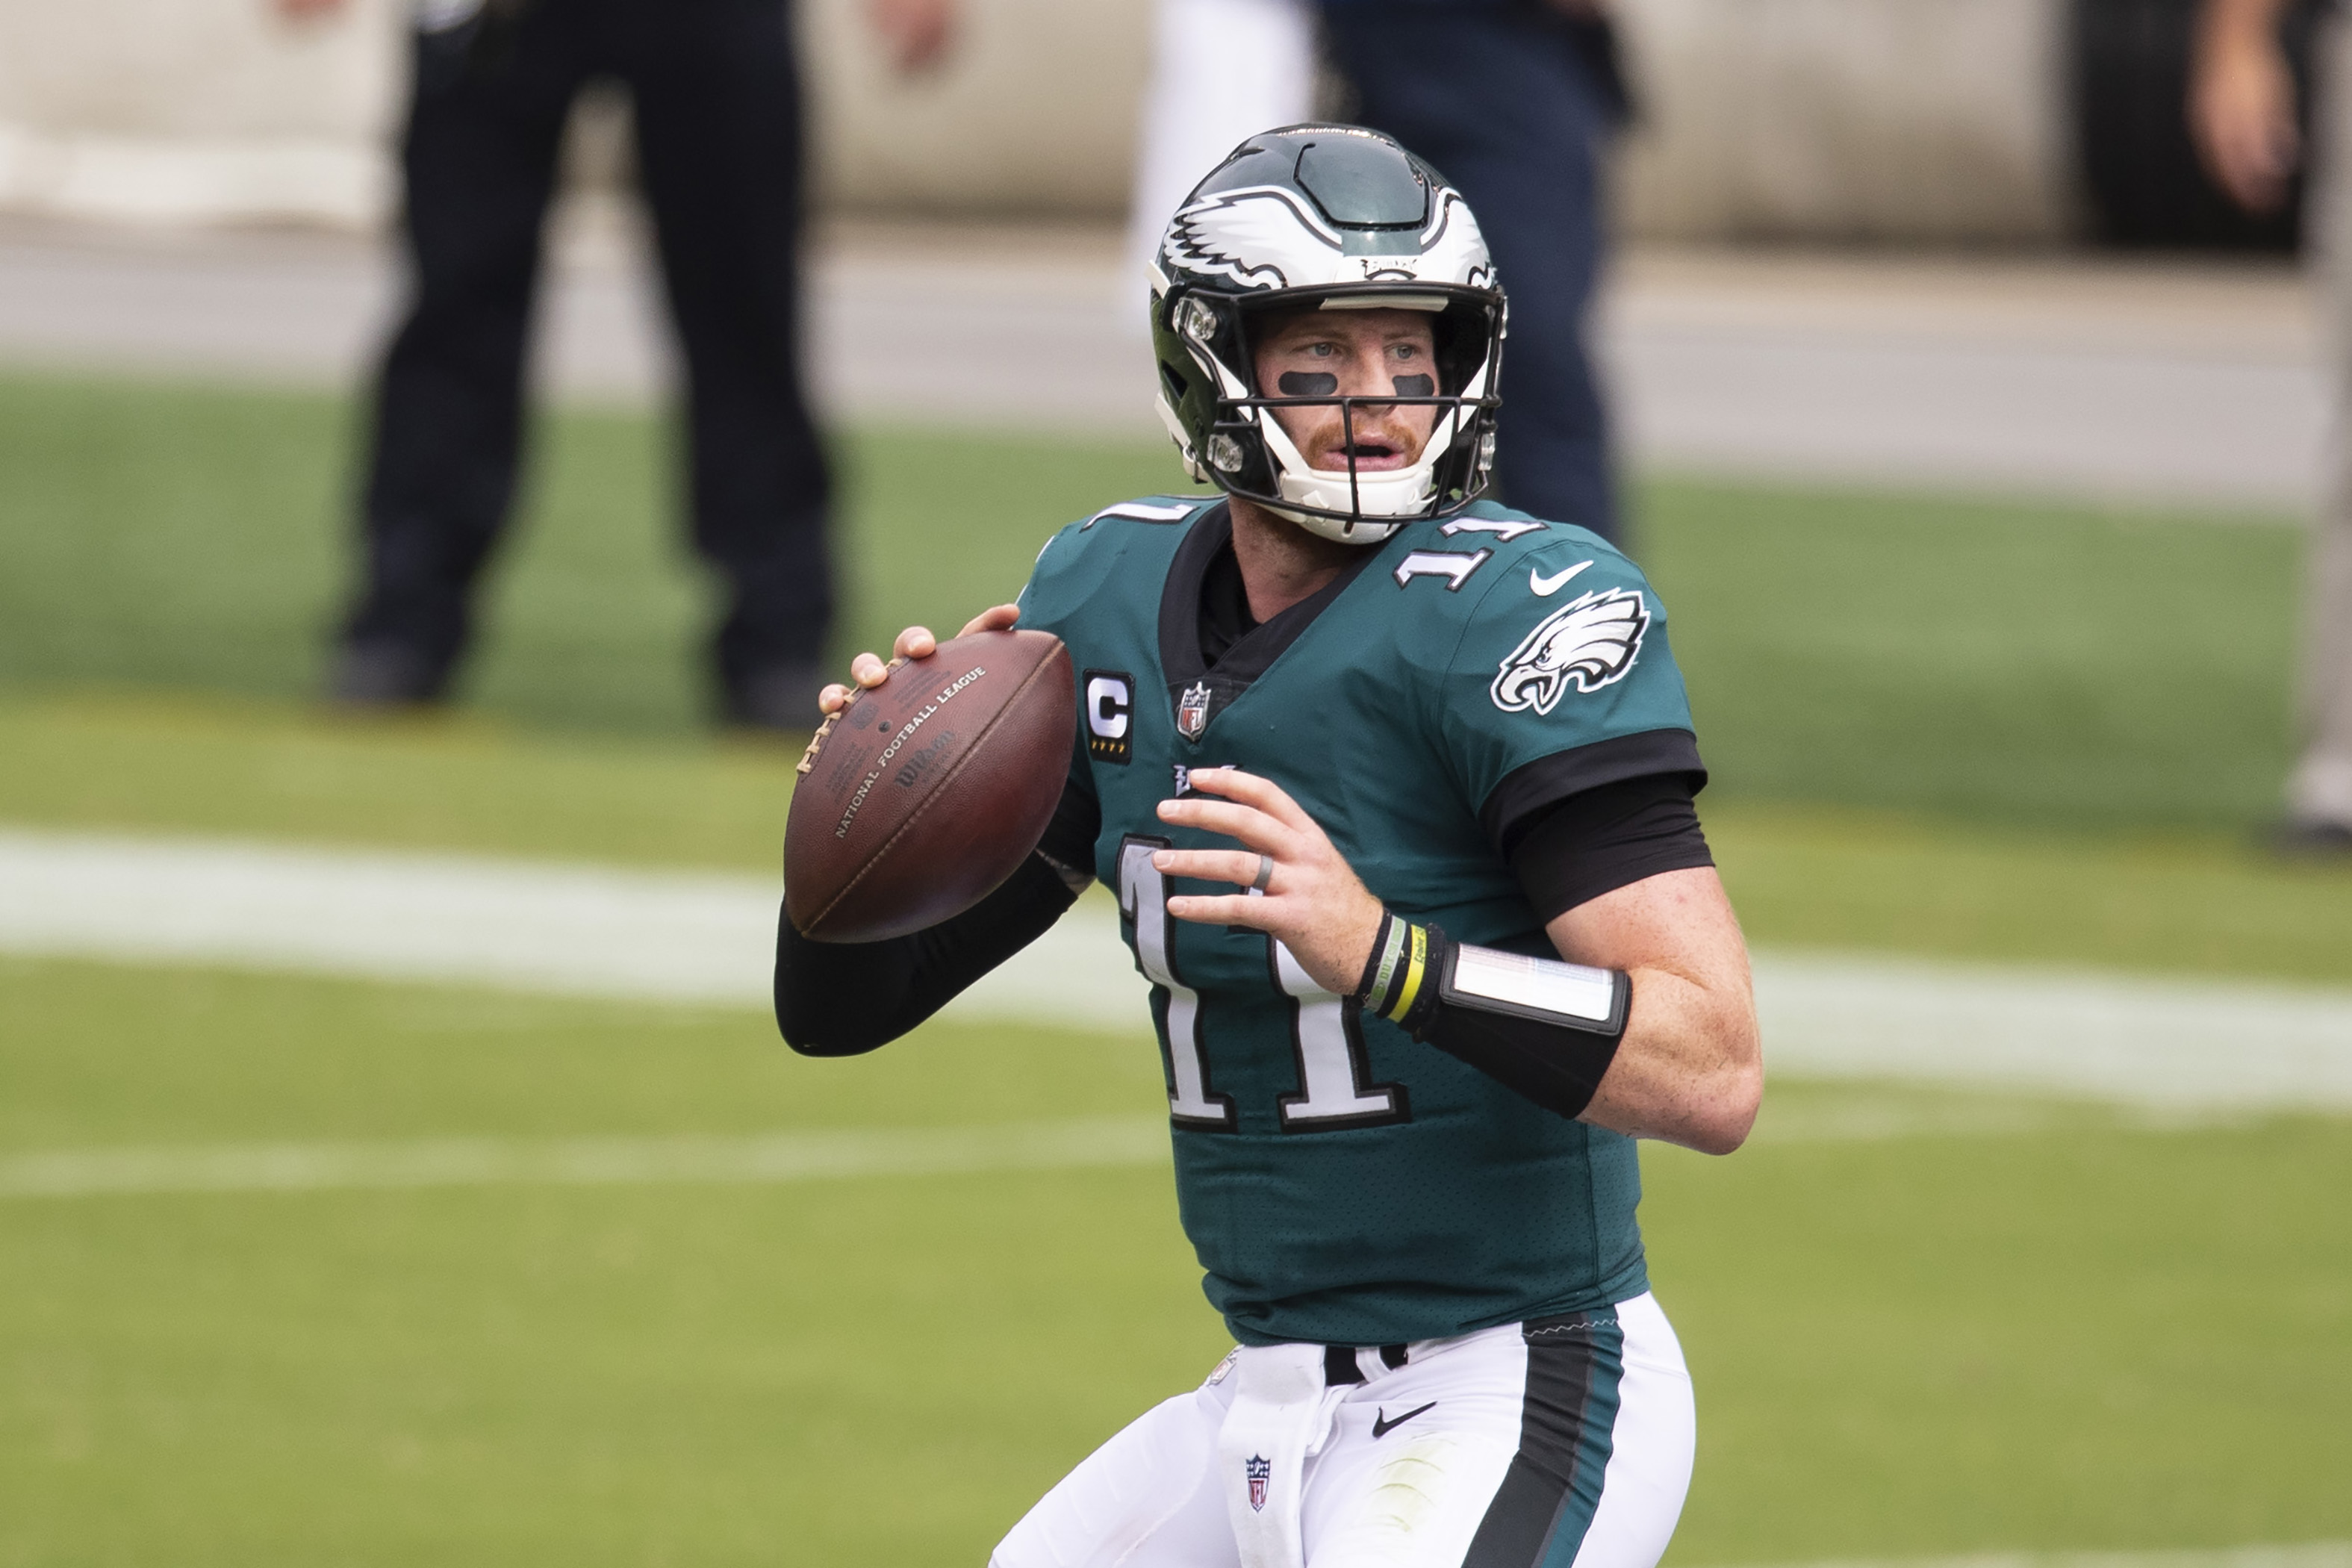 Carson Wentz drops back from a pass